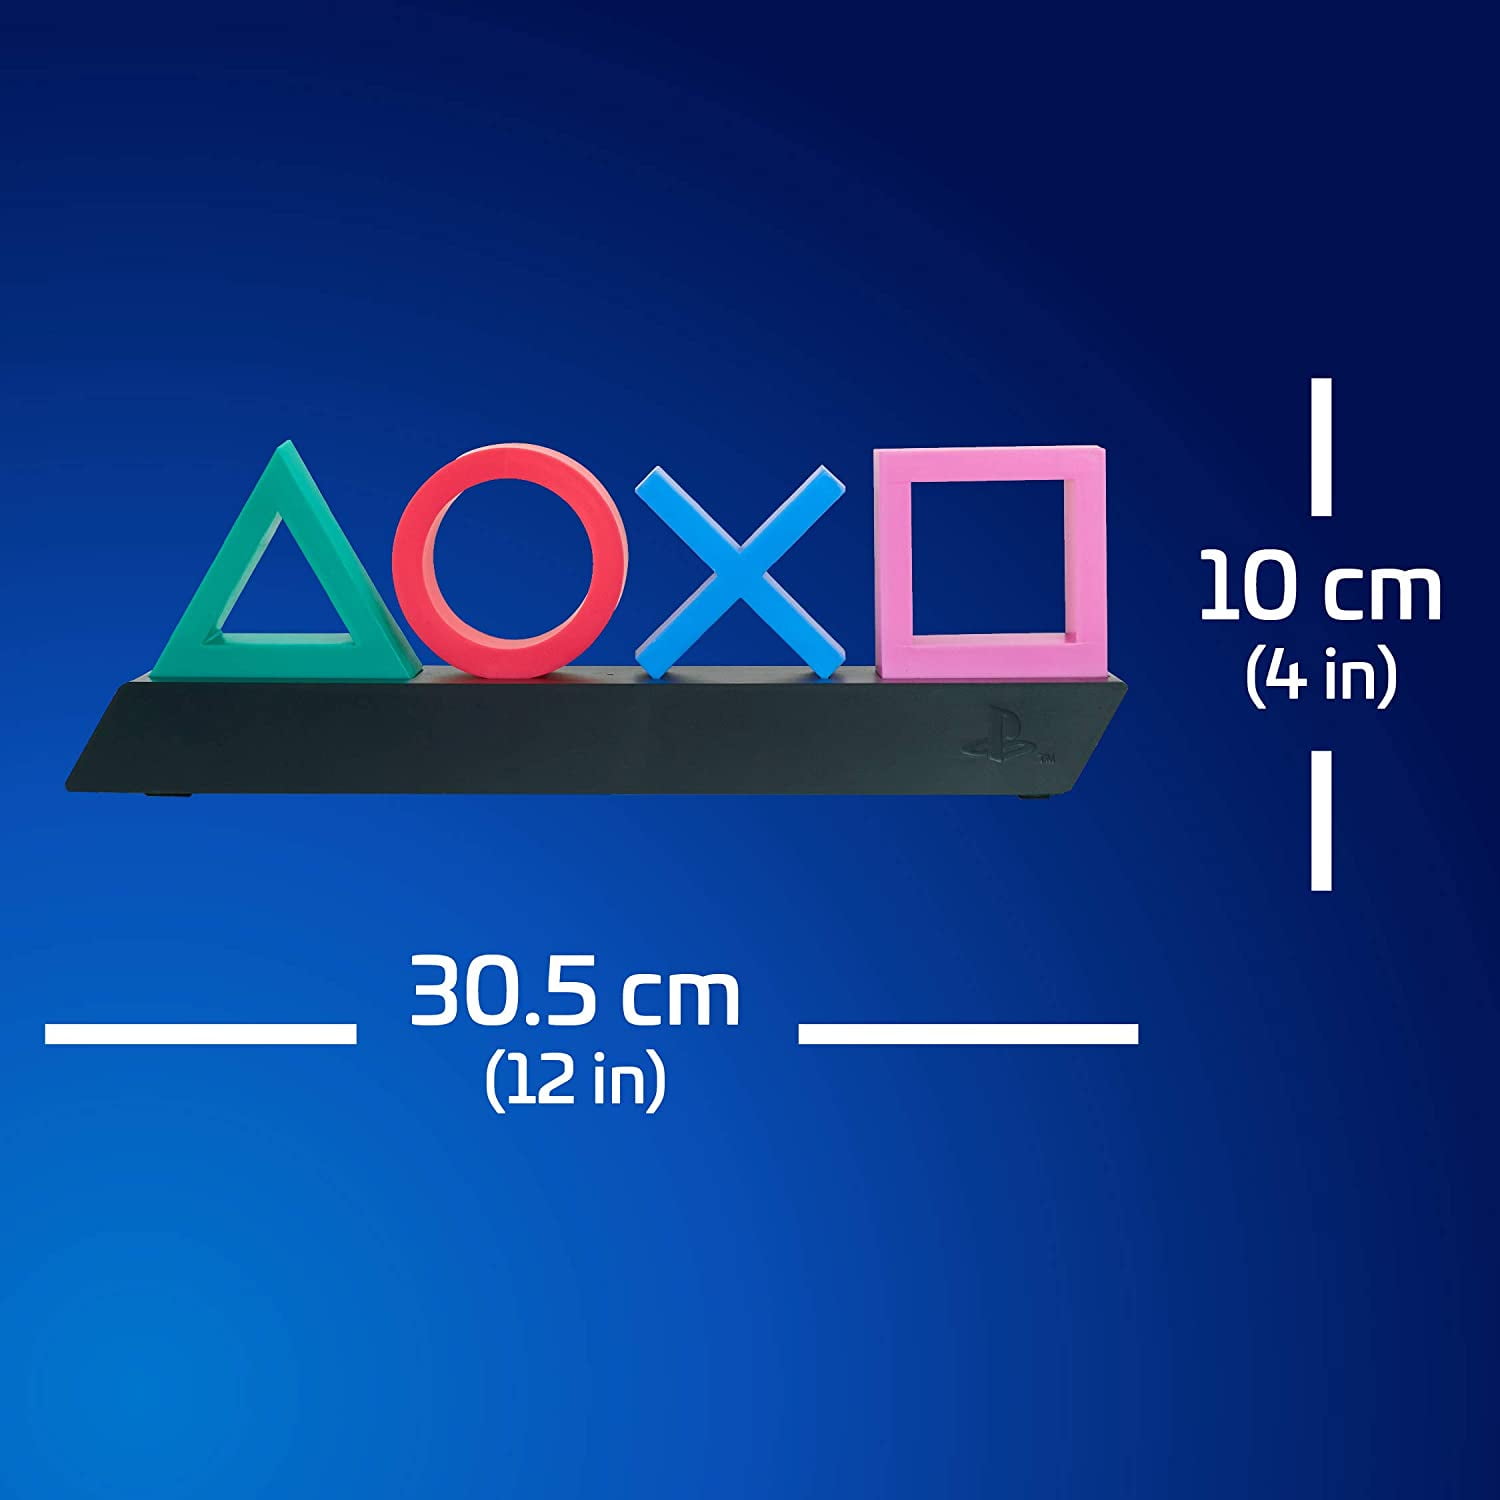 PlayStation Icon Lamp For Gamer : FREE PlayStation Icon Lamp Shipping!